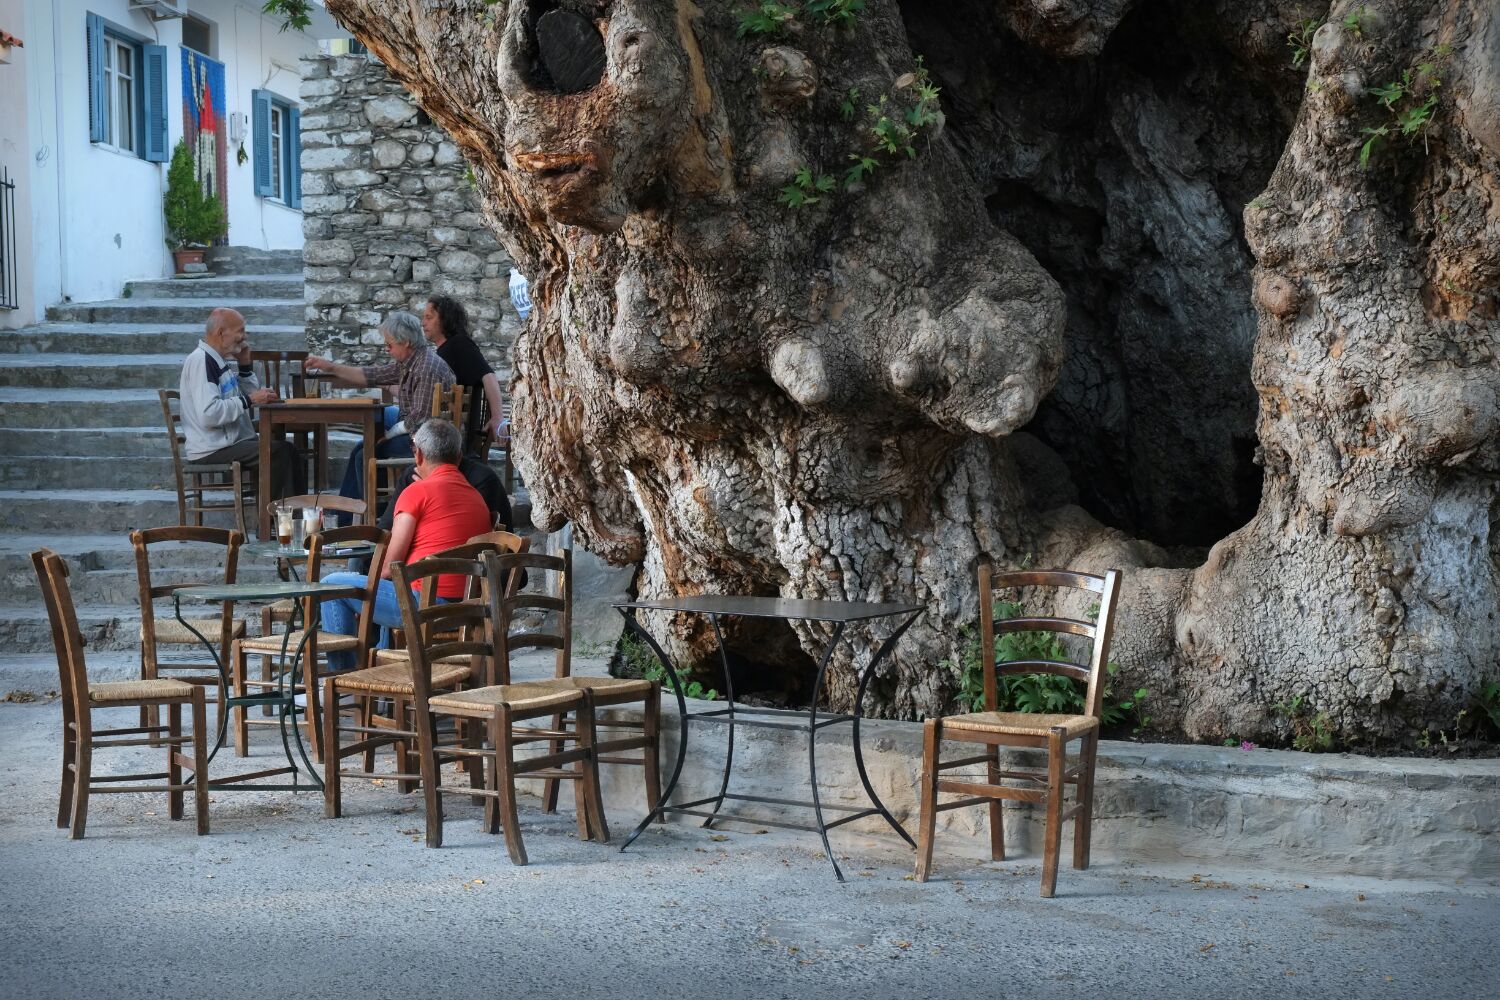 Giant old tree in the center of Ano Viannos. As with all the villages hereabouts it was a friendly place with a couple of good cafes to kick back and watch the world go by.